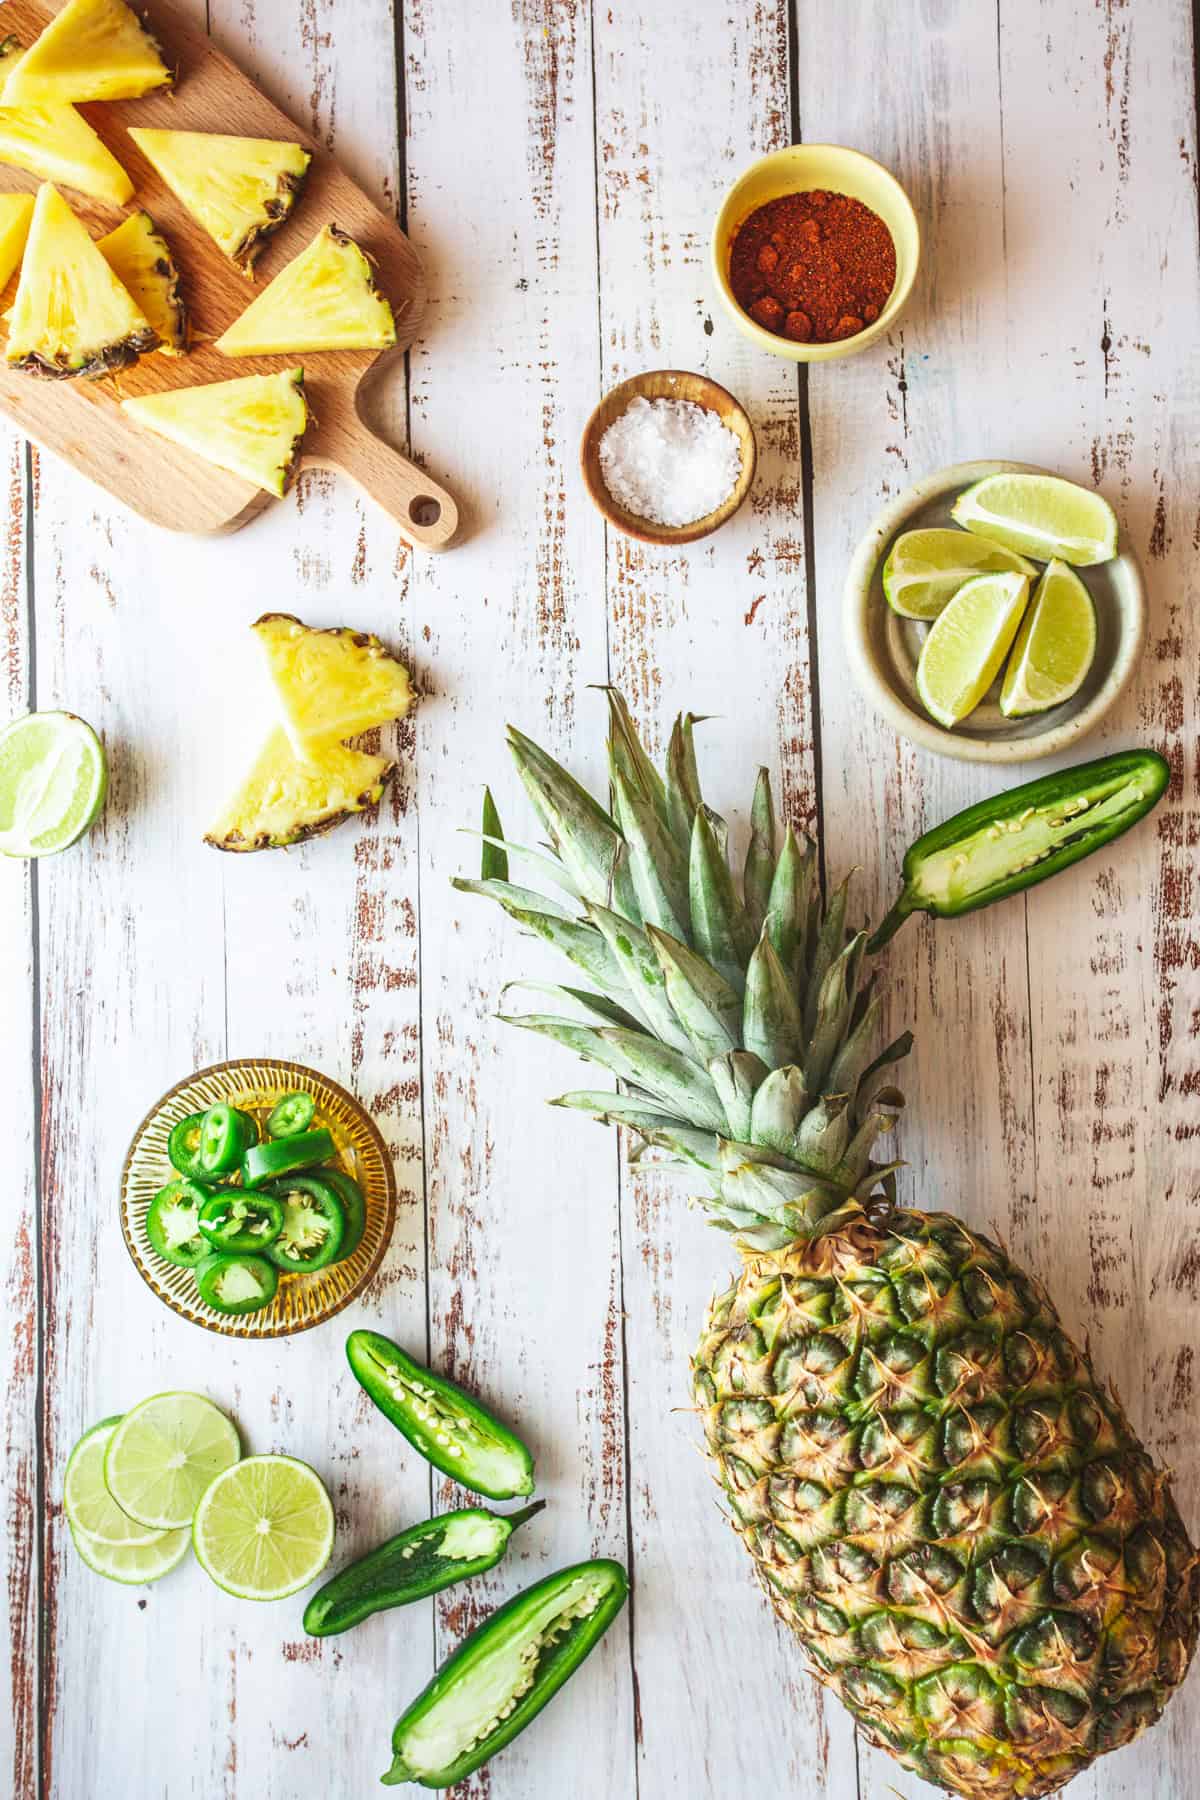 A pineapple, limes, jalapeos and other ingredients on a wooden table.